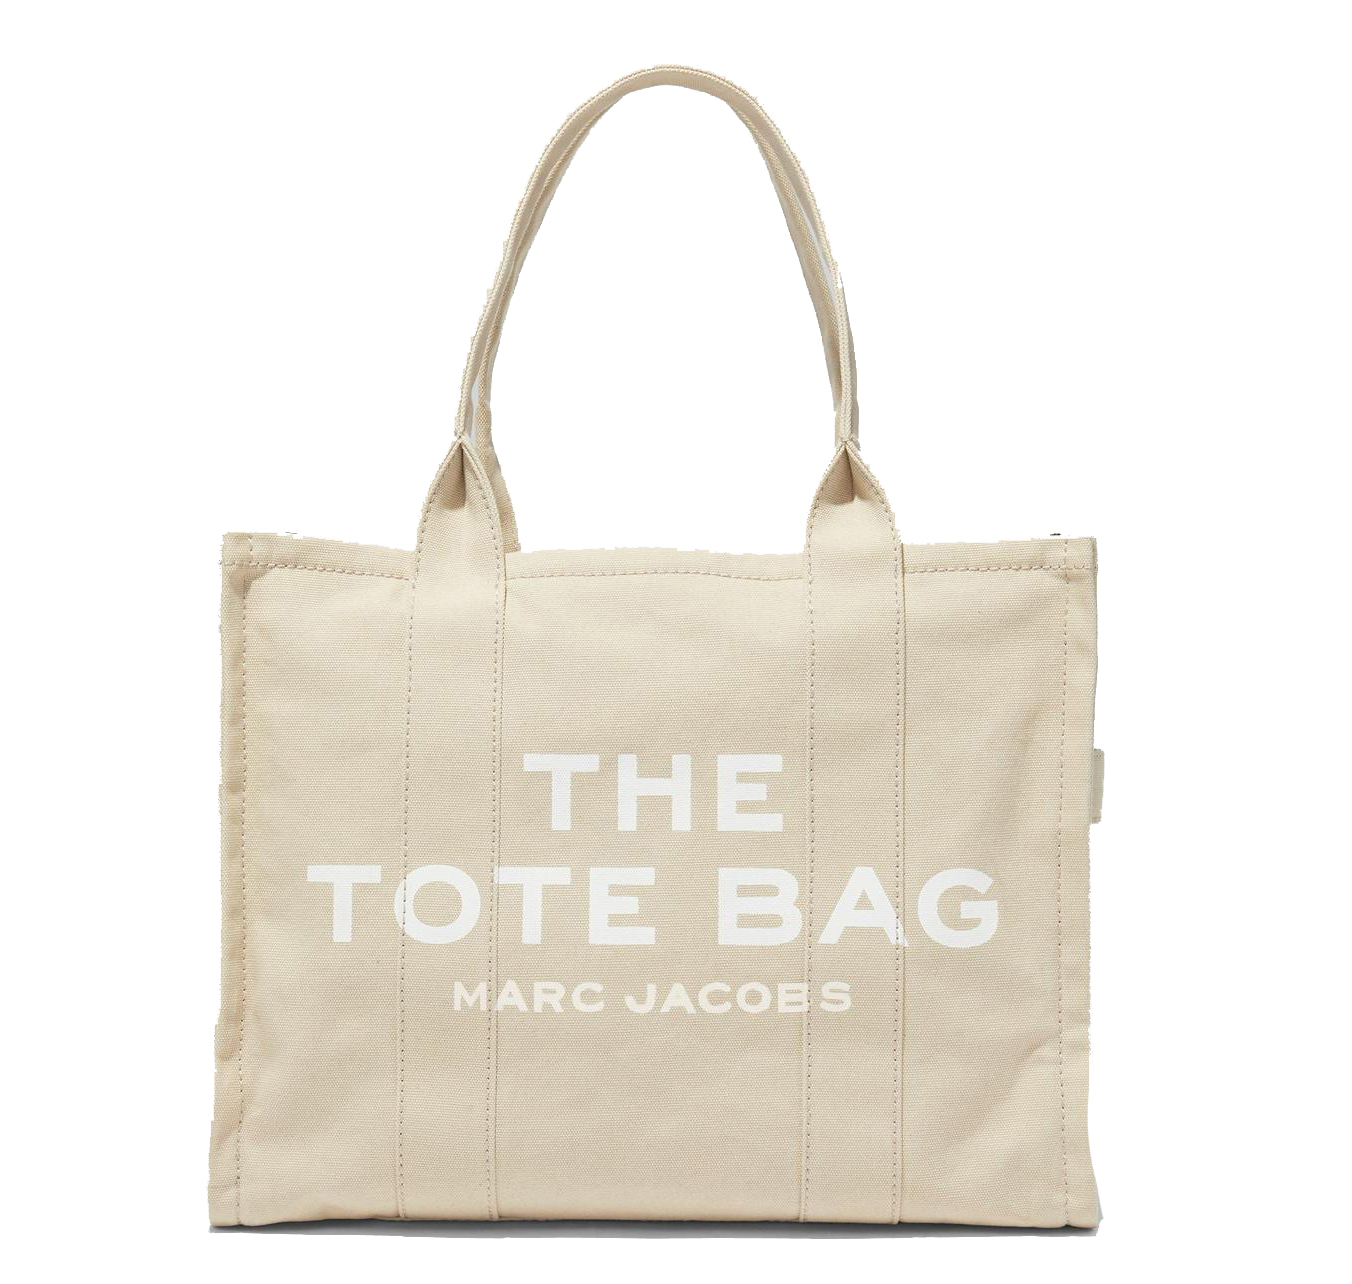 Bolso Marc Jacobs the tote bag grande beige